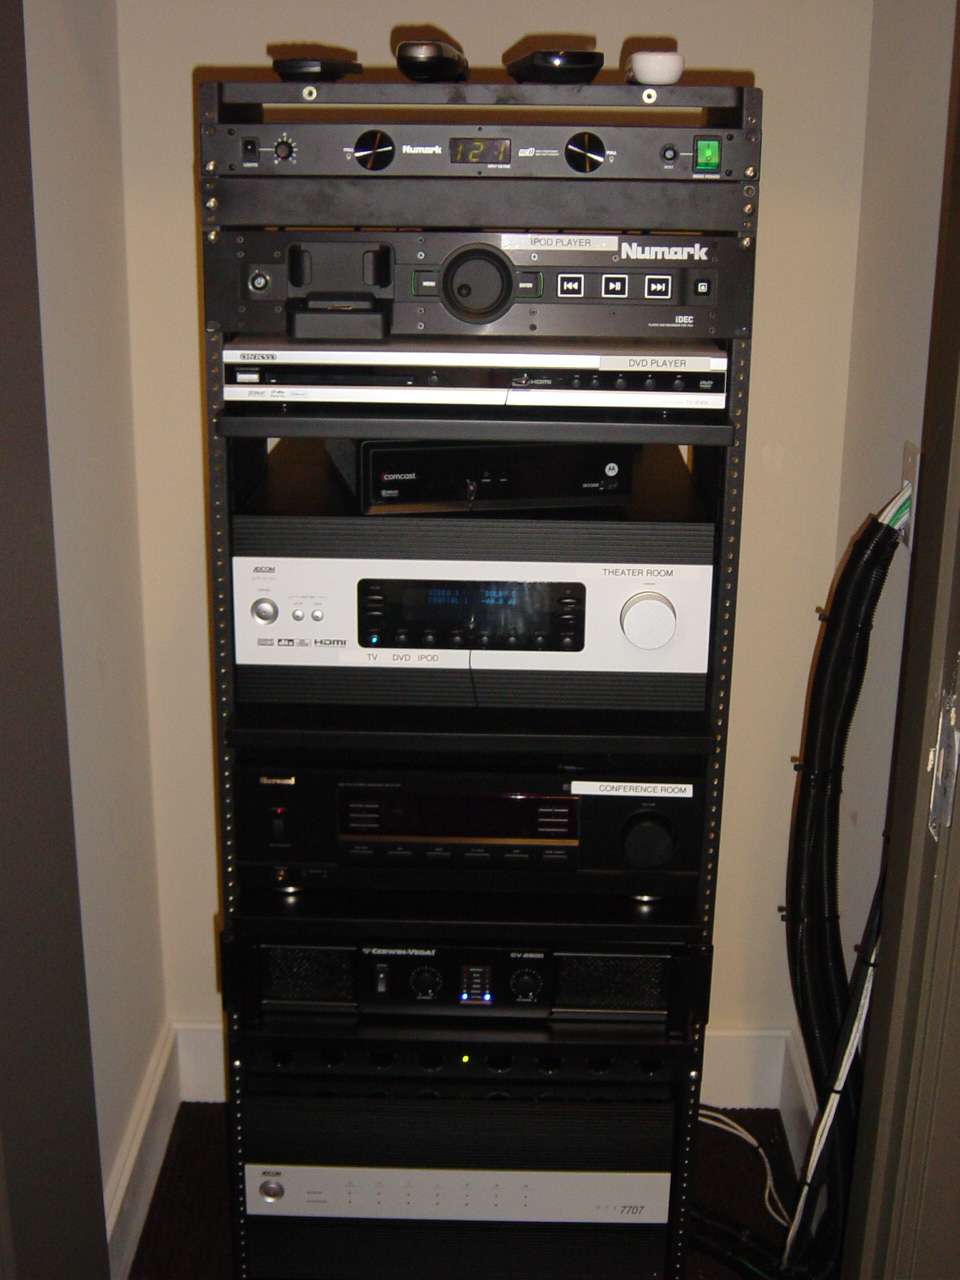 Sterling Home Theater | 30 Messina Woods Dr, Braintree, MA 02184, USA | Phone: (617) 755-9811